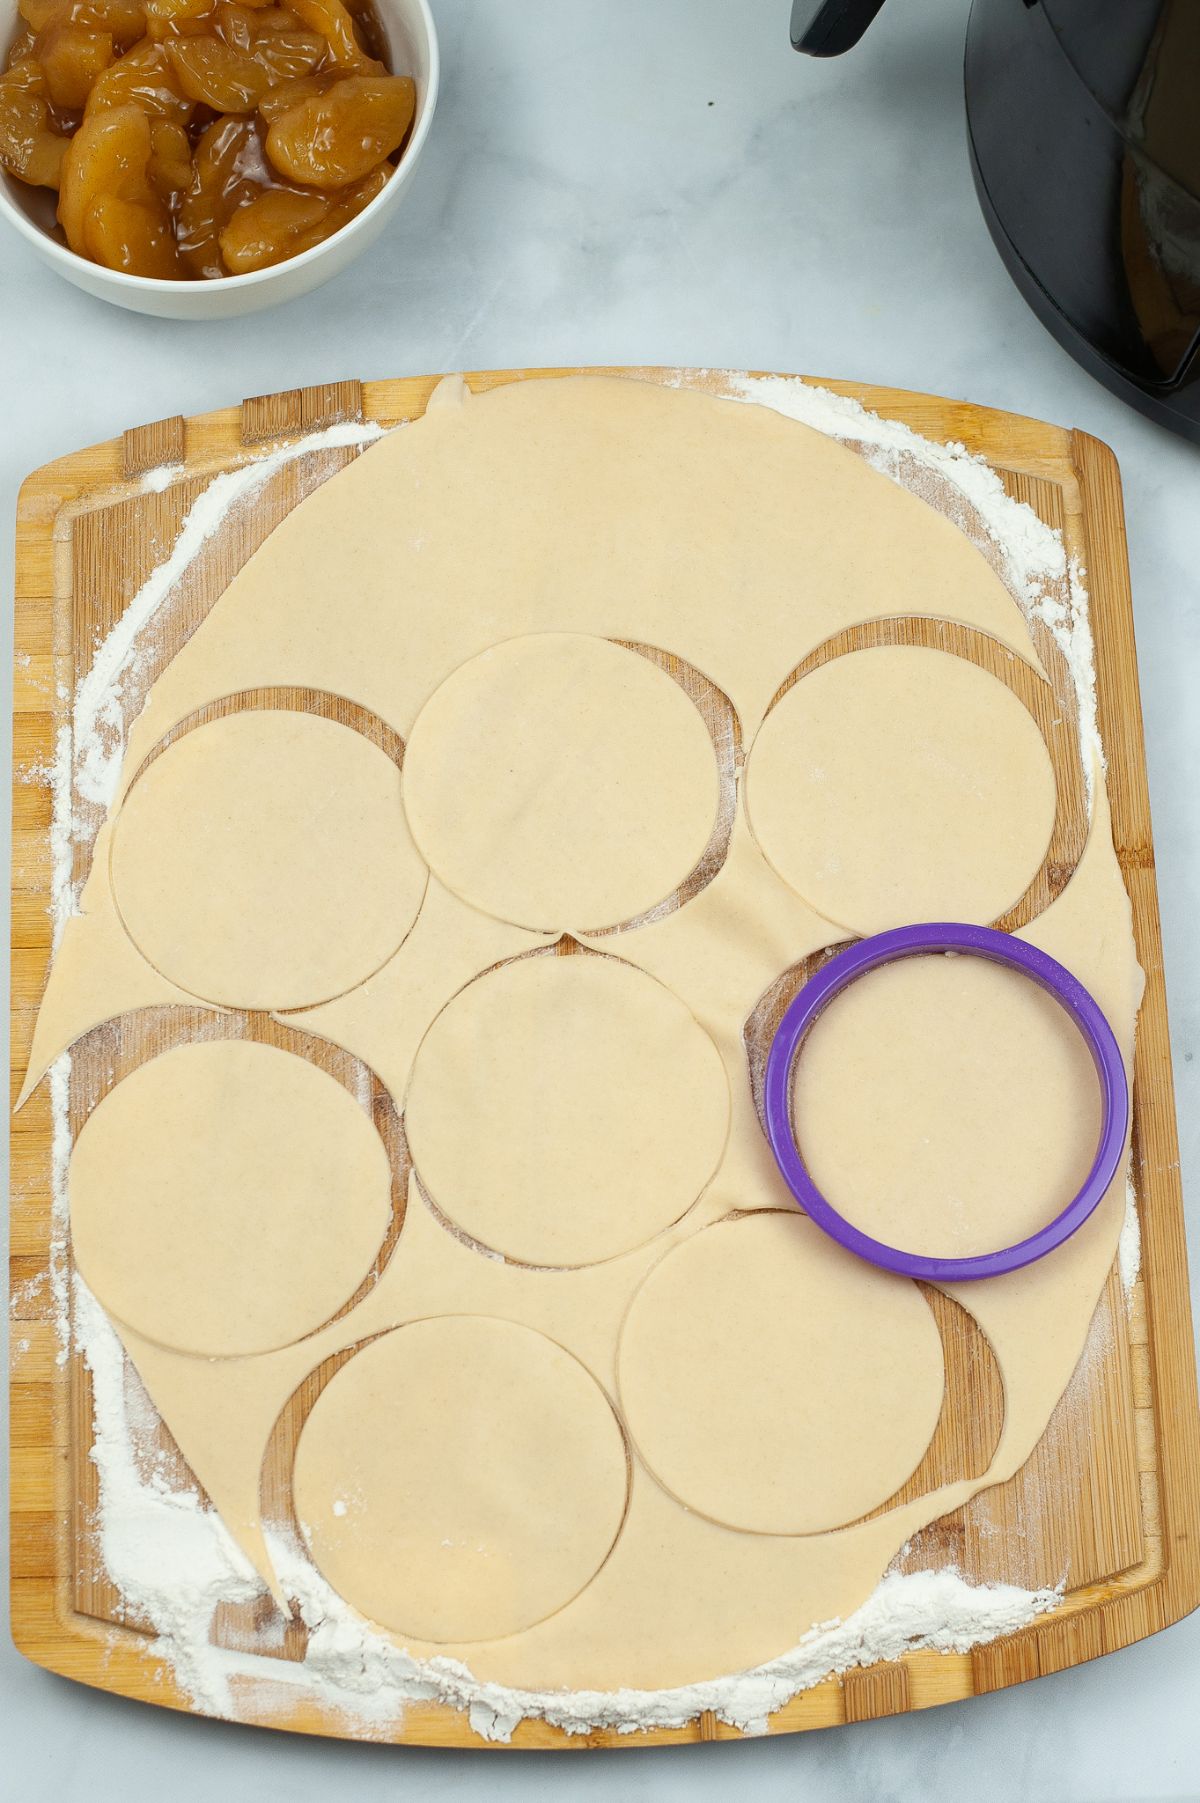 A flattened pie crust on a wooden chopping board being cut out to form circle for the pies.